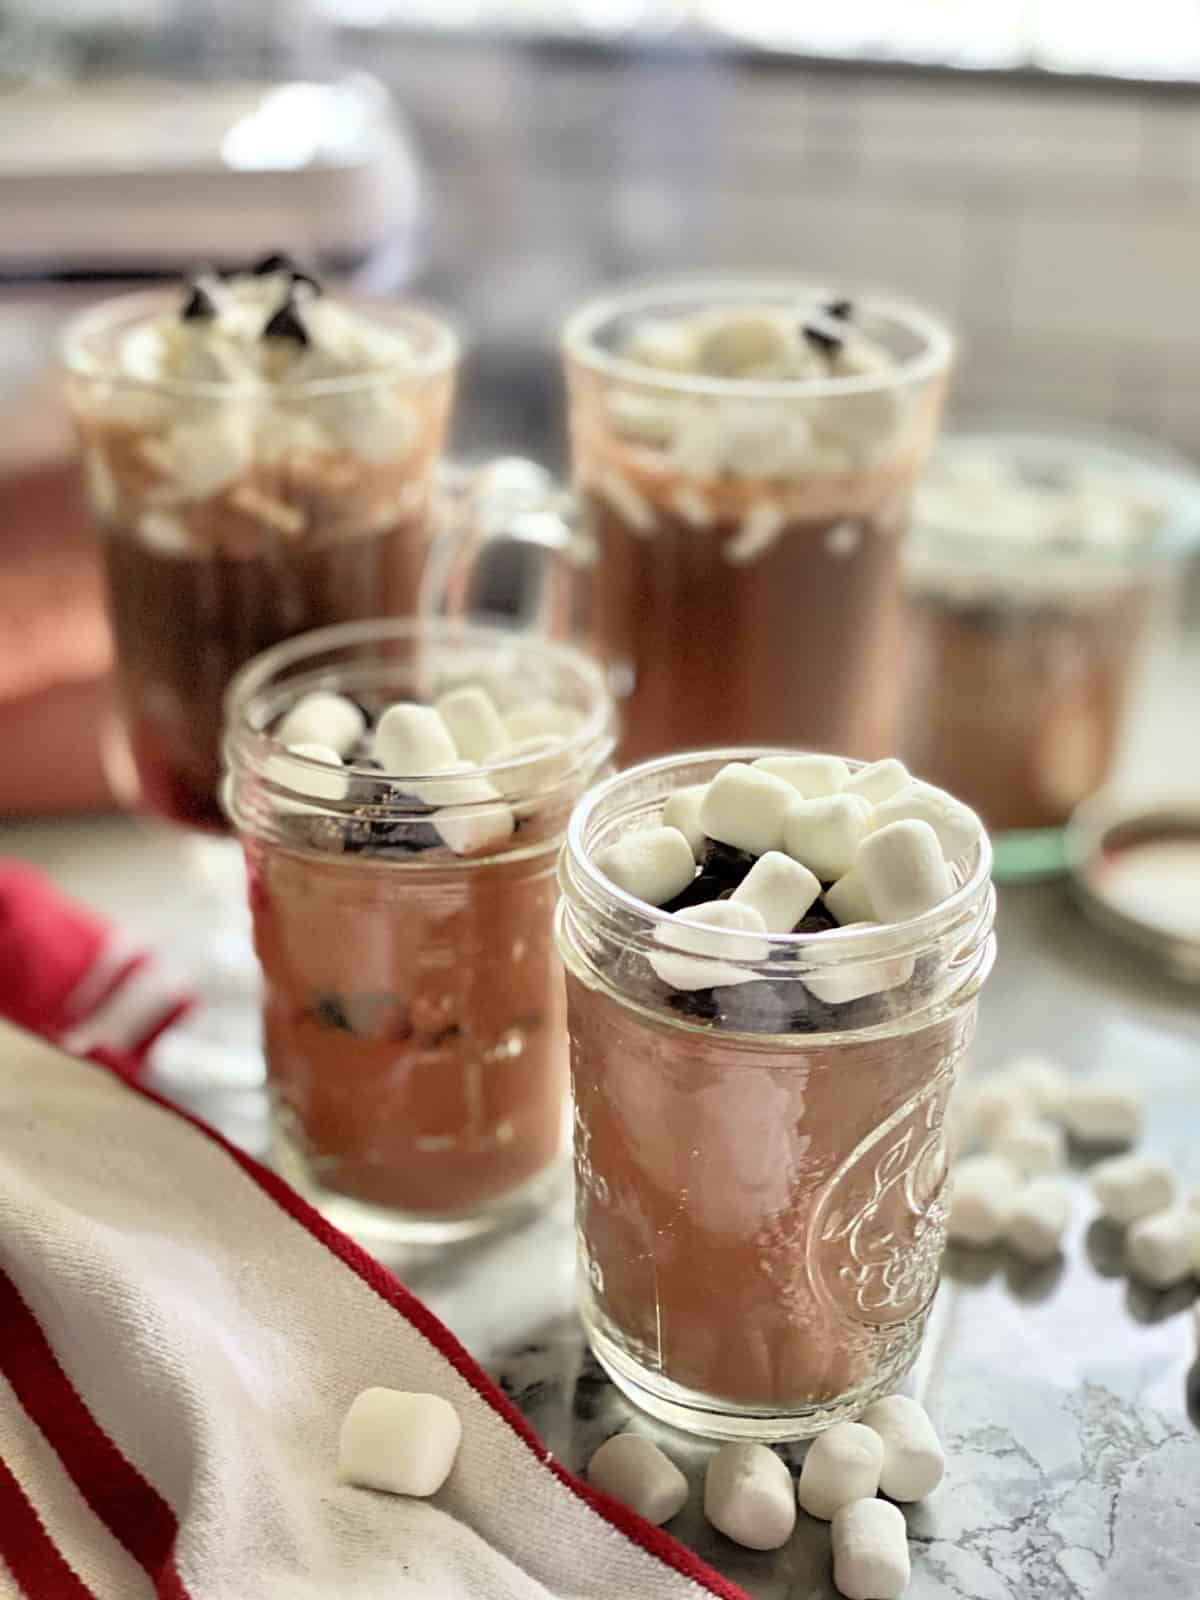 Two mason jars filled with cocoa mix and two glasses blurred out of hot chocolate in the background.